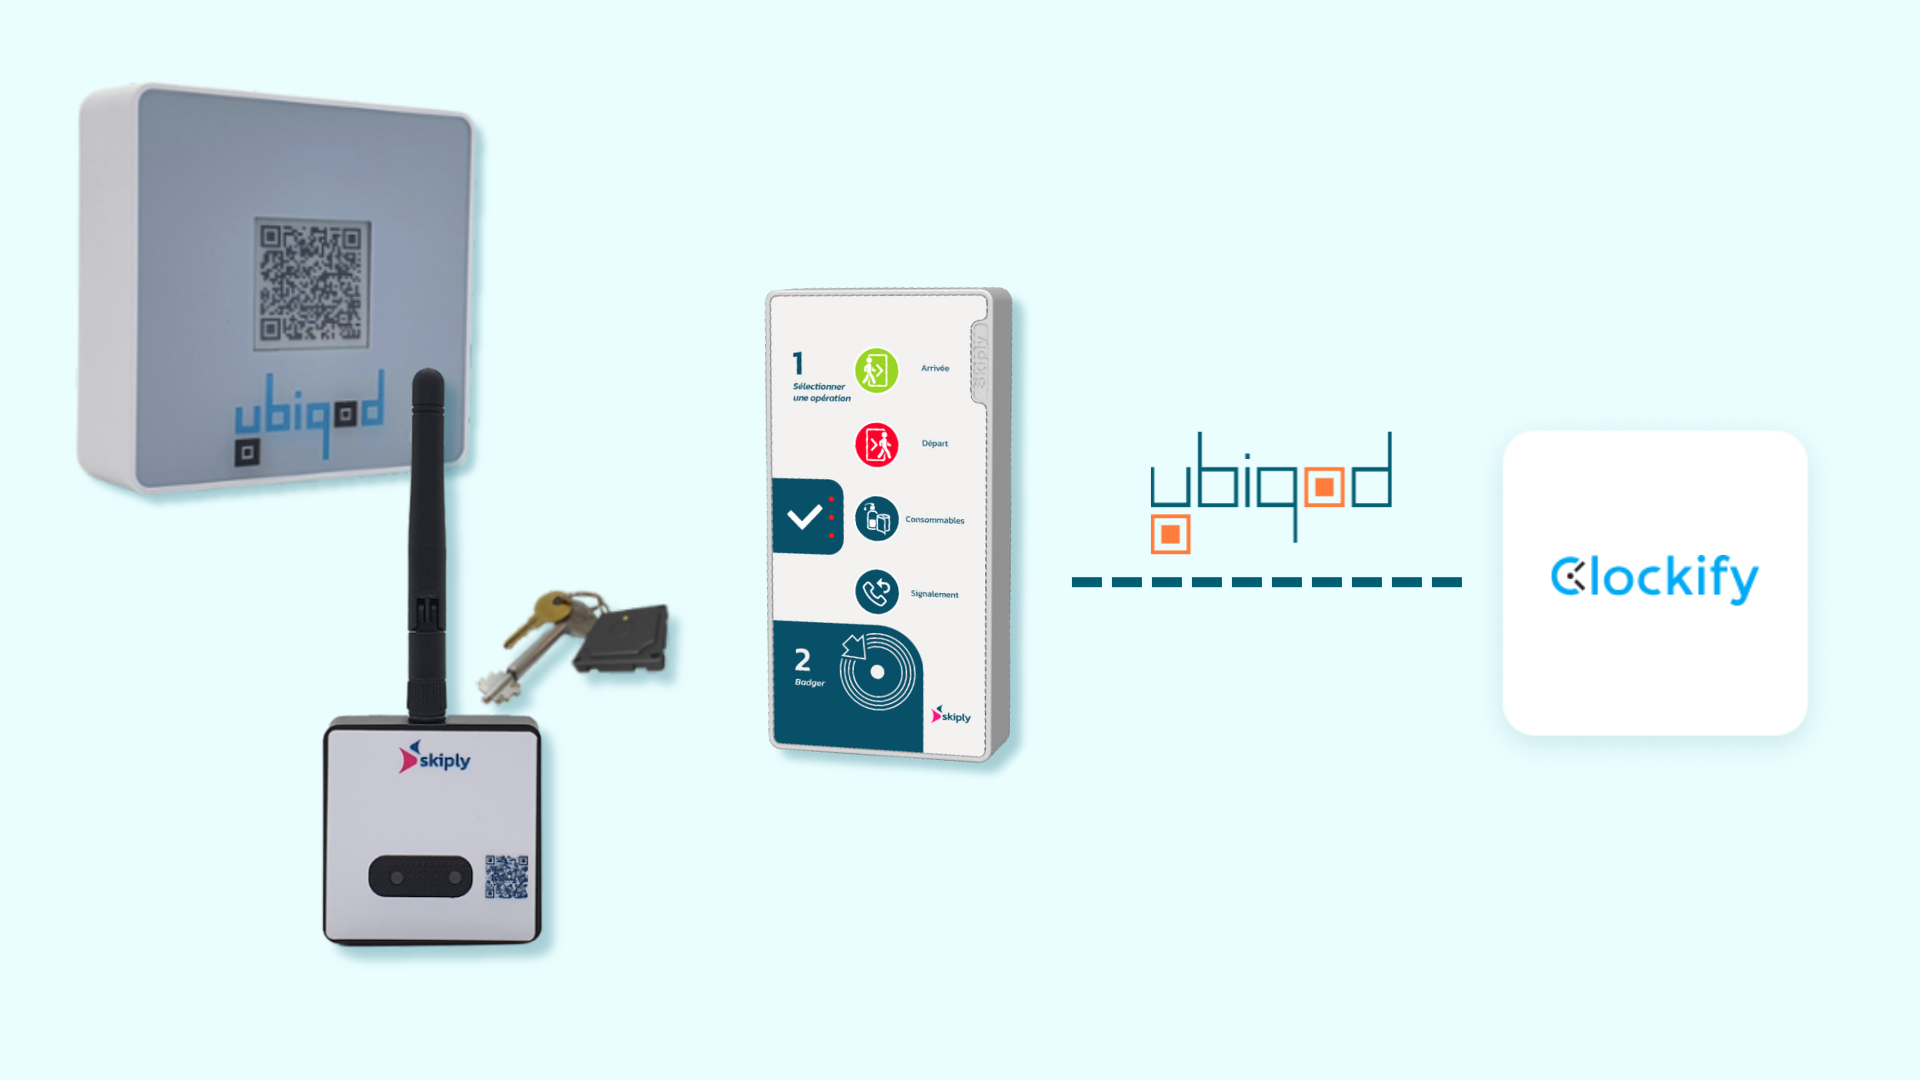 Ubiqod connects to Clockify